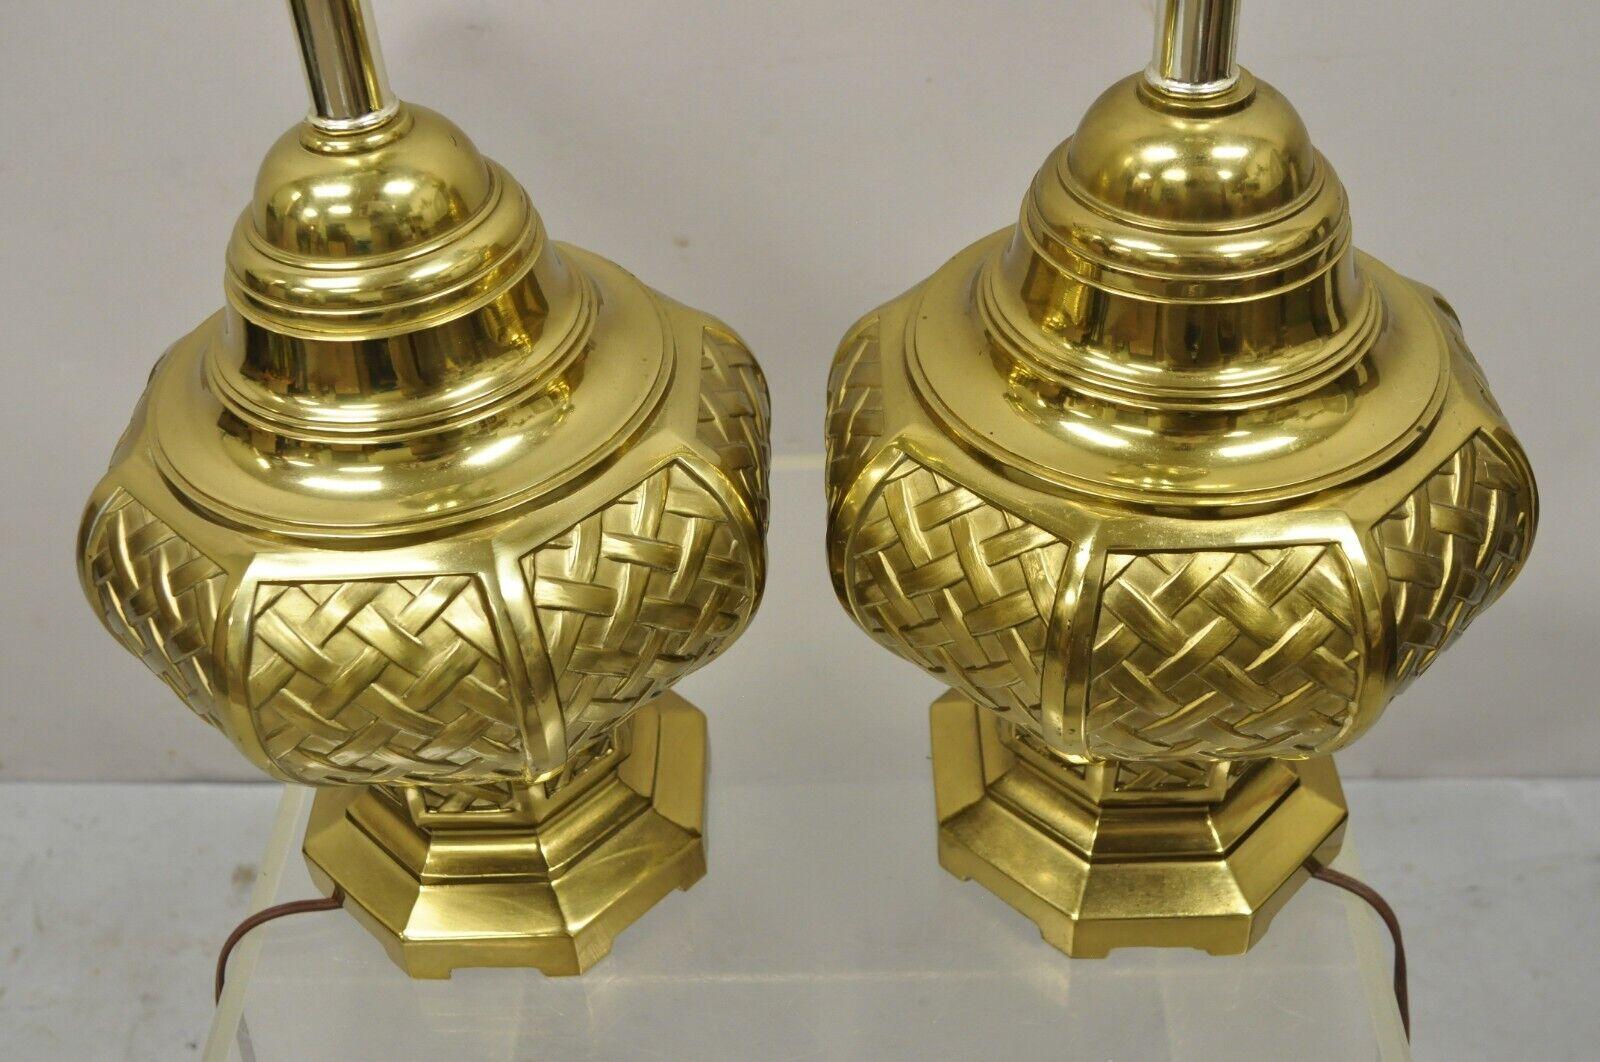 Vintage Brass Woven Basket Basketweave Hollywood Regency Table Lamps, a Pair In Good Condition For Sale In Philadelphia, PA